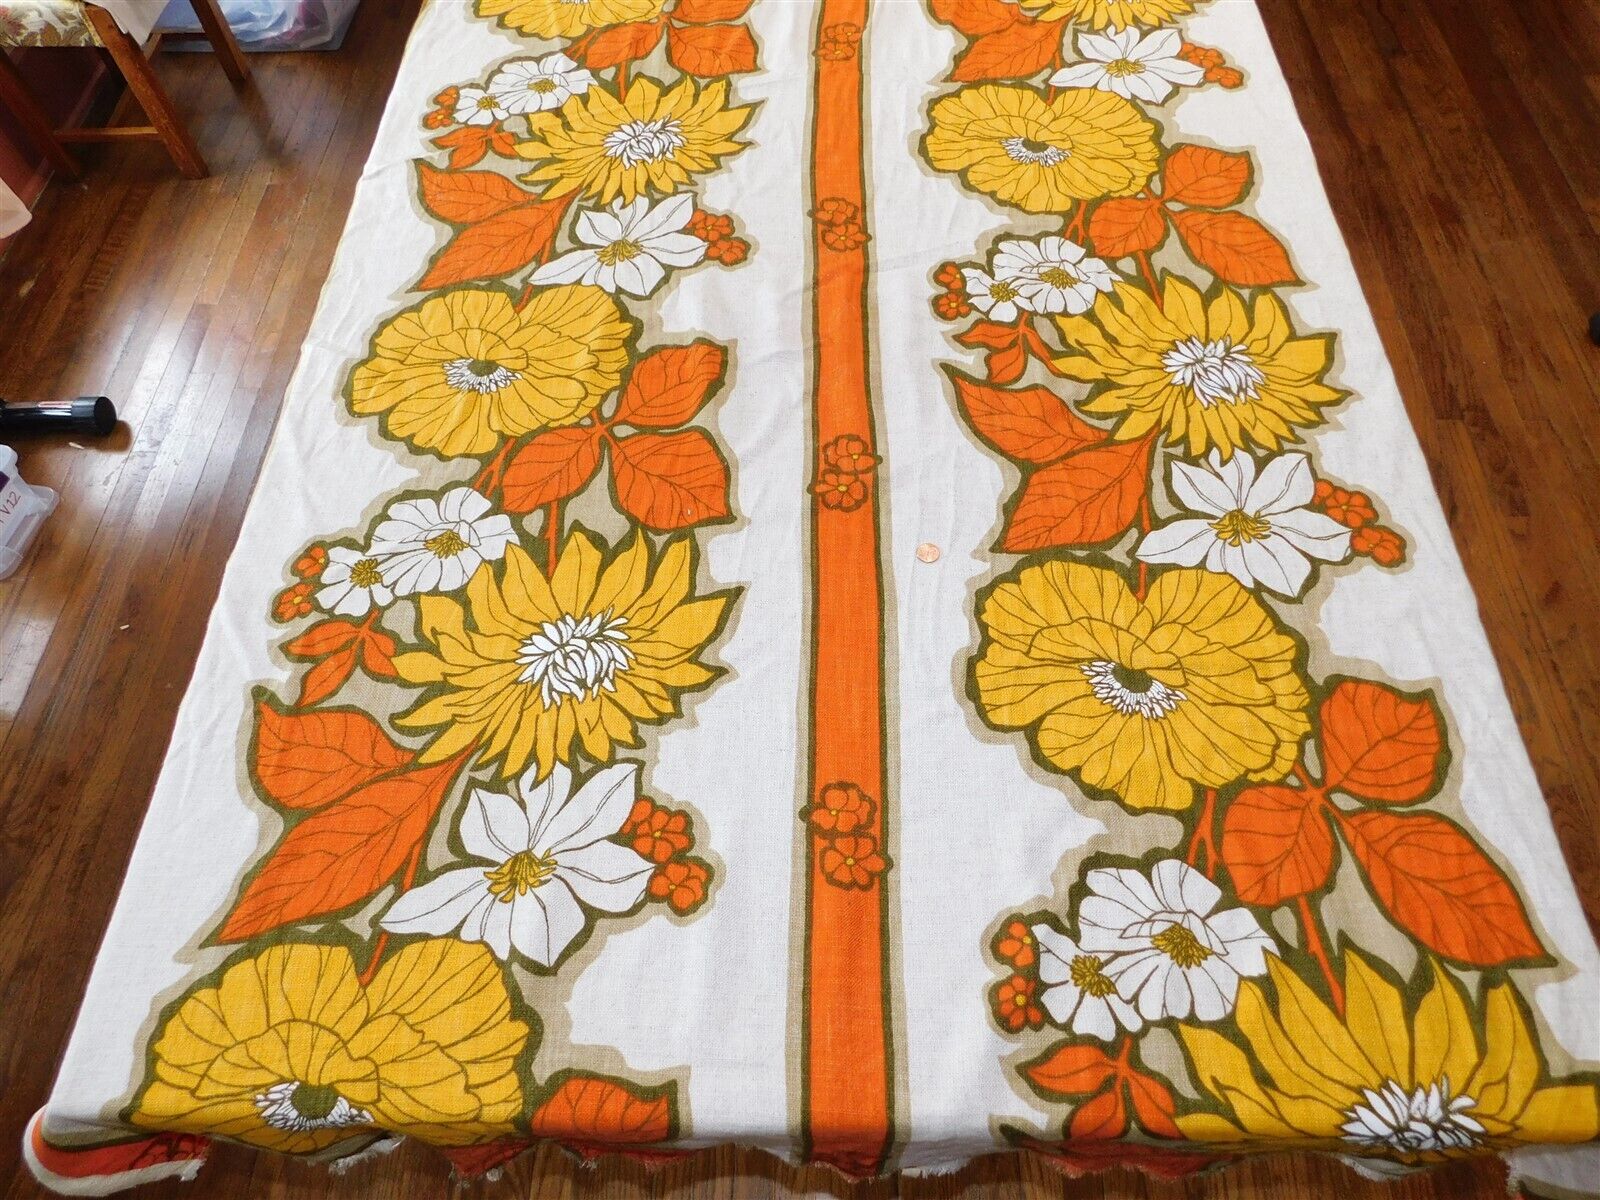 Vtg 1970s Bold Floral Print Orange Yellow Gold MOD Curtain Home Decor Fabric BTY